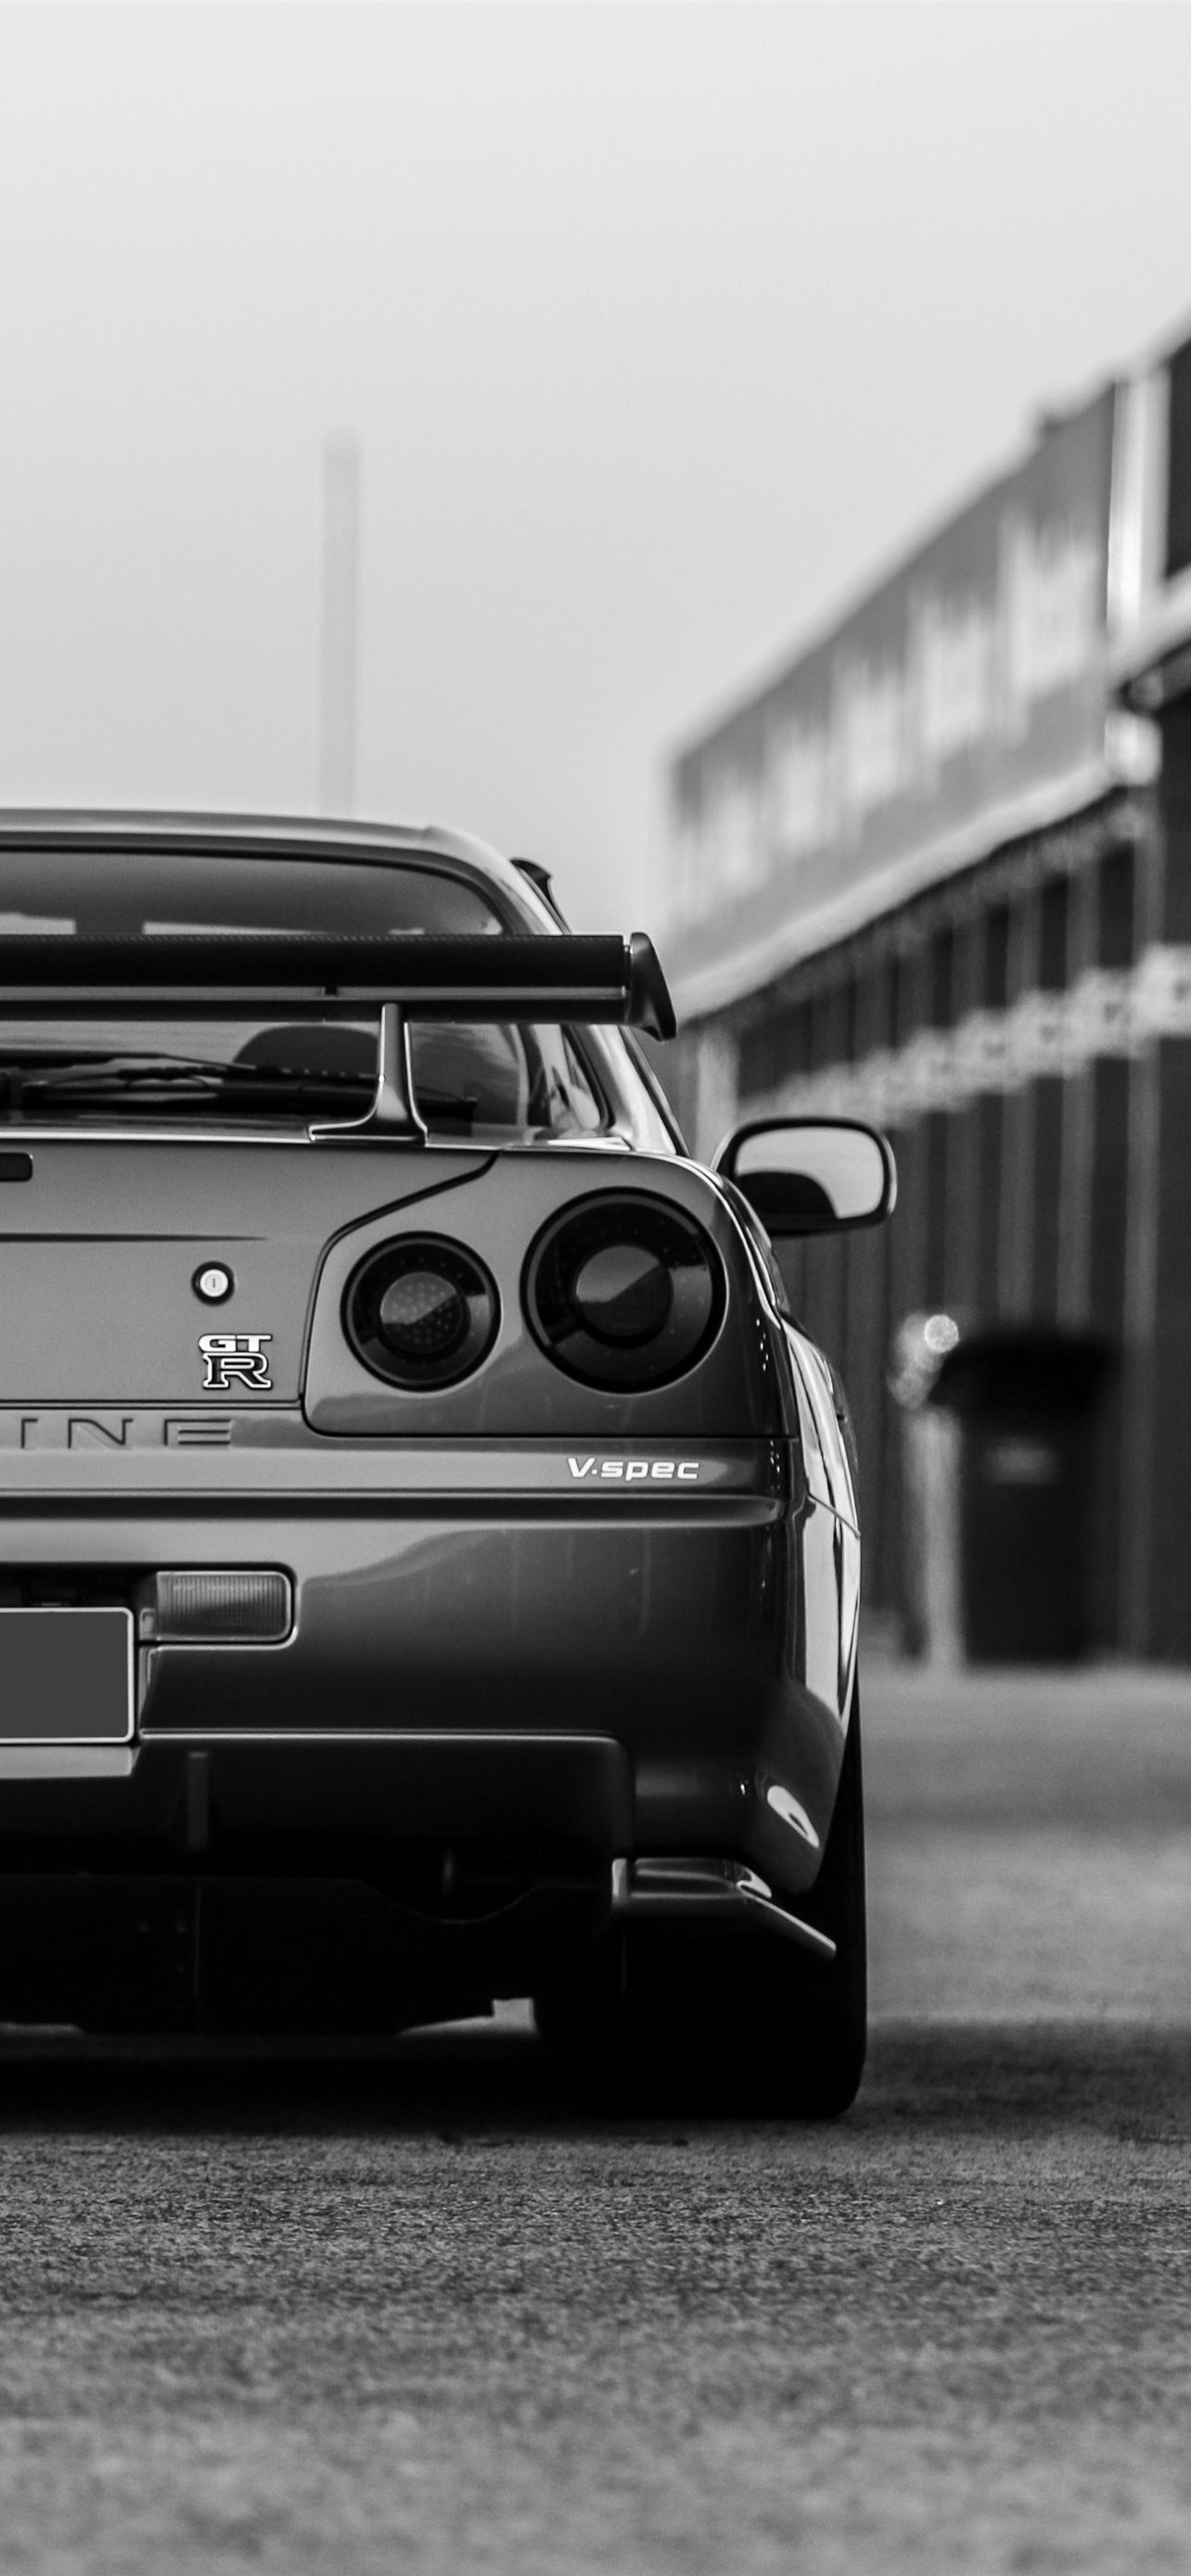 Nissan GT-R, Nismo edition, iPhone wallpapers, Free download, 1290x2780 HD Phone